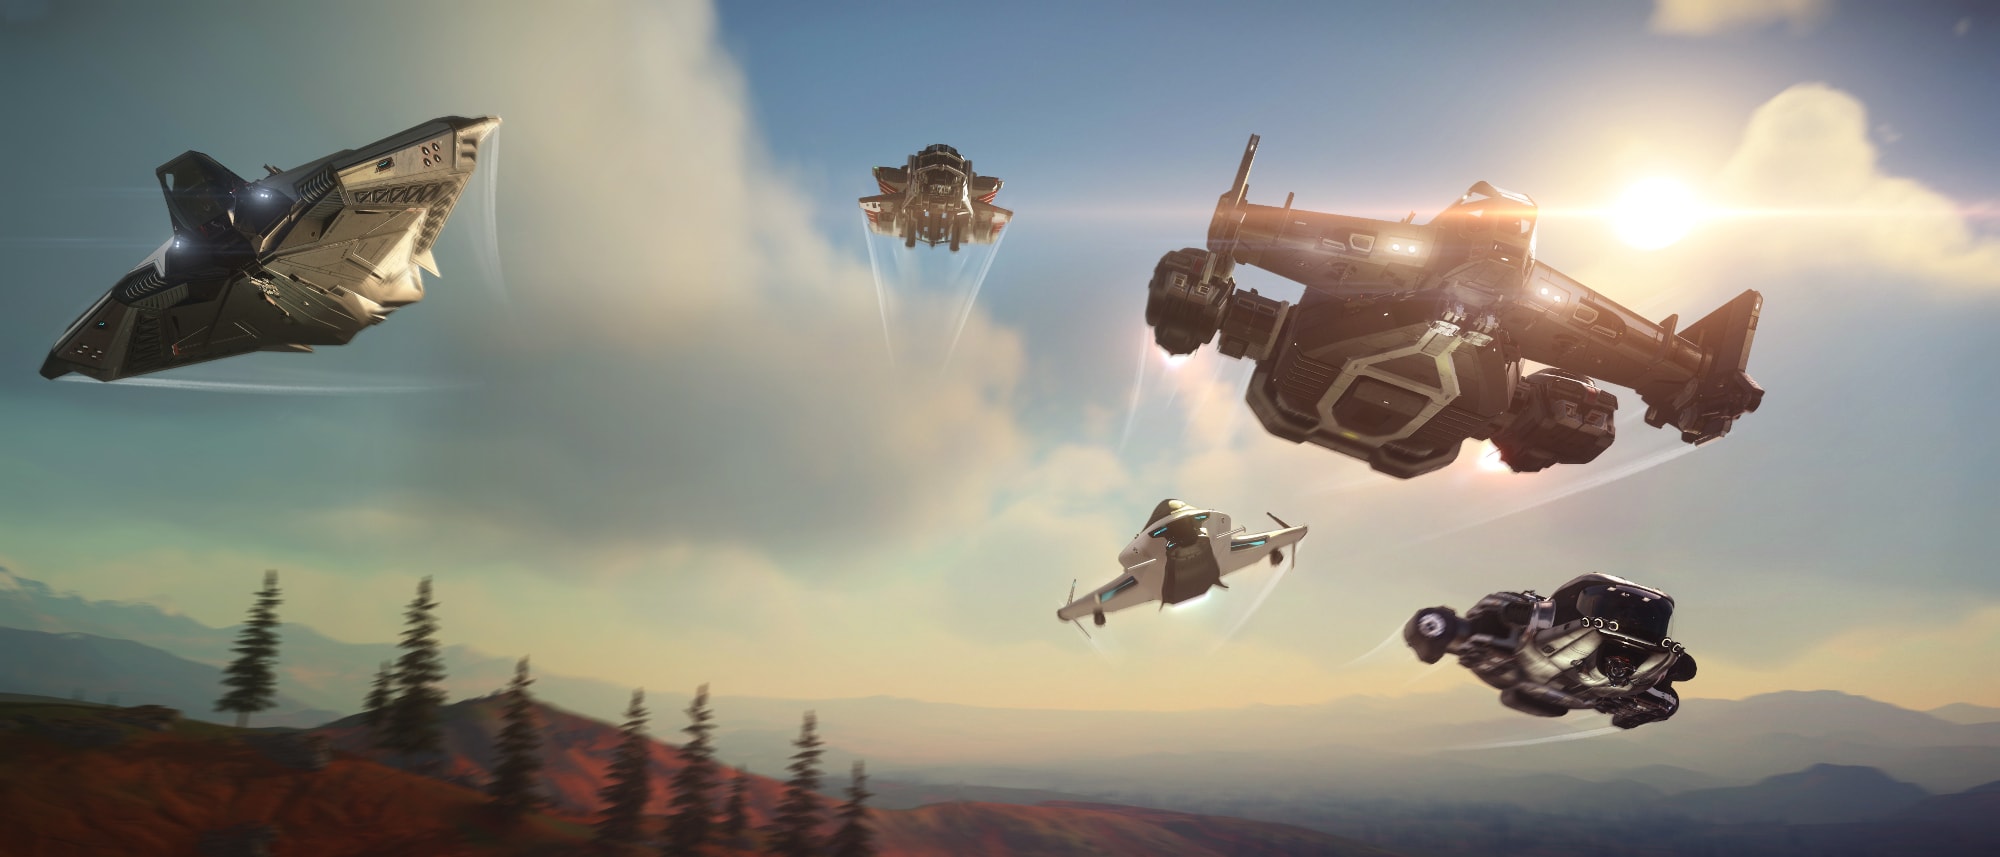 The Star Citizen Free Fly Event is now live. Play the game at no cost for